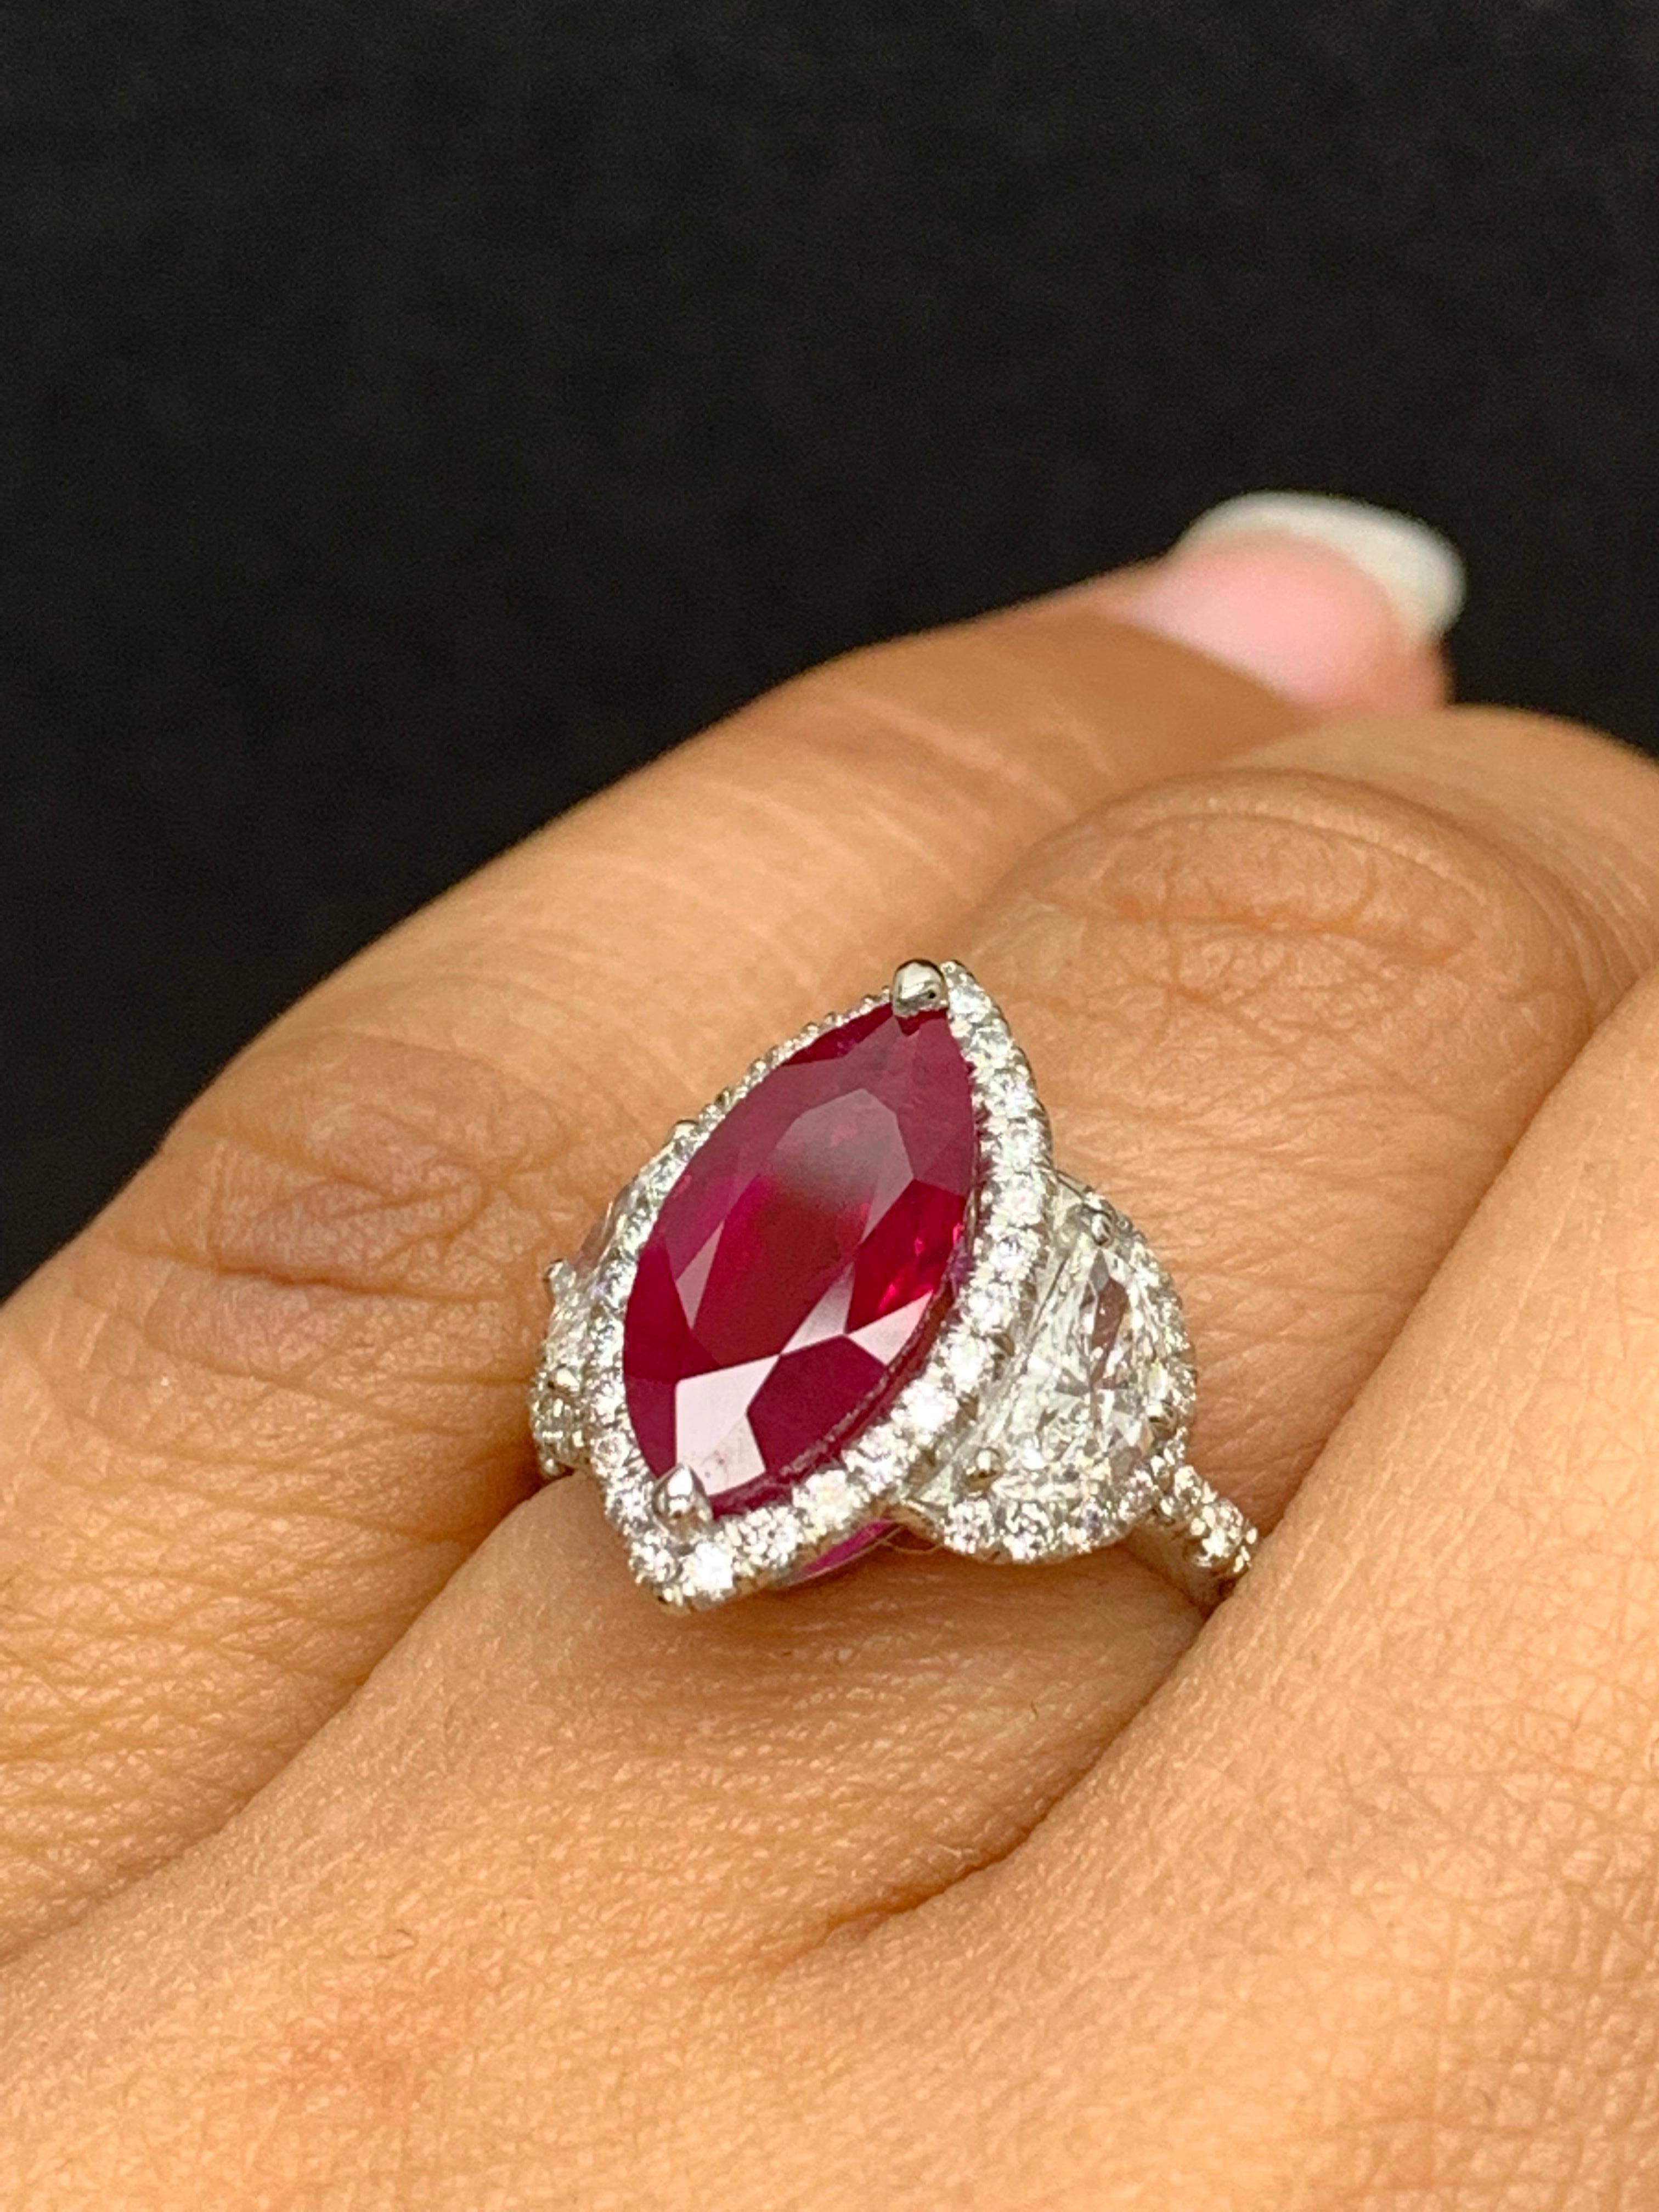 Certified 3.01 Carat Marquise Cut Burma Ruby Diamond 3 Stone Halo Ring Platinum For Sale 4